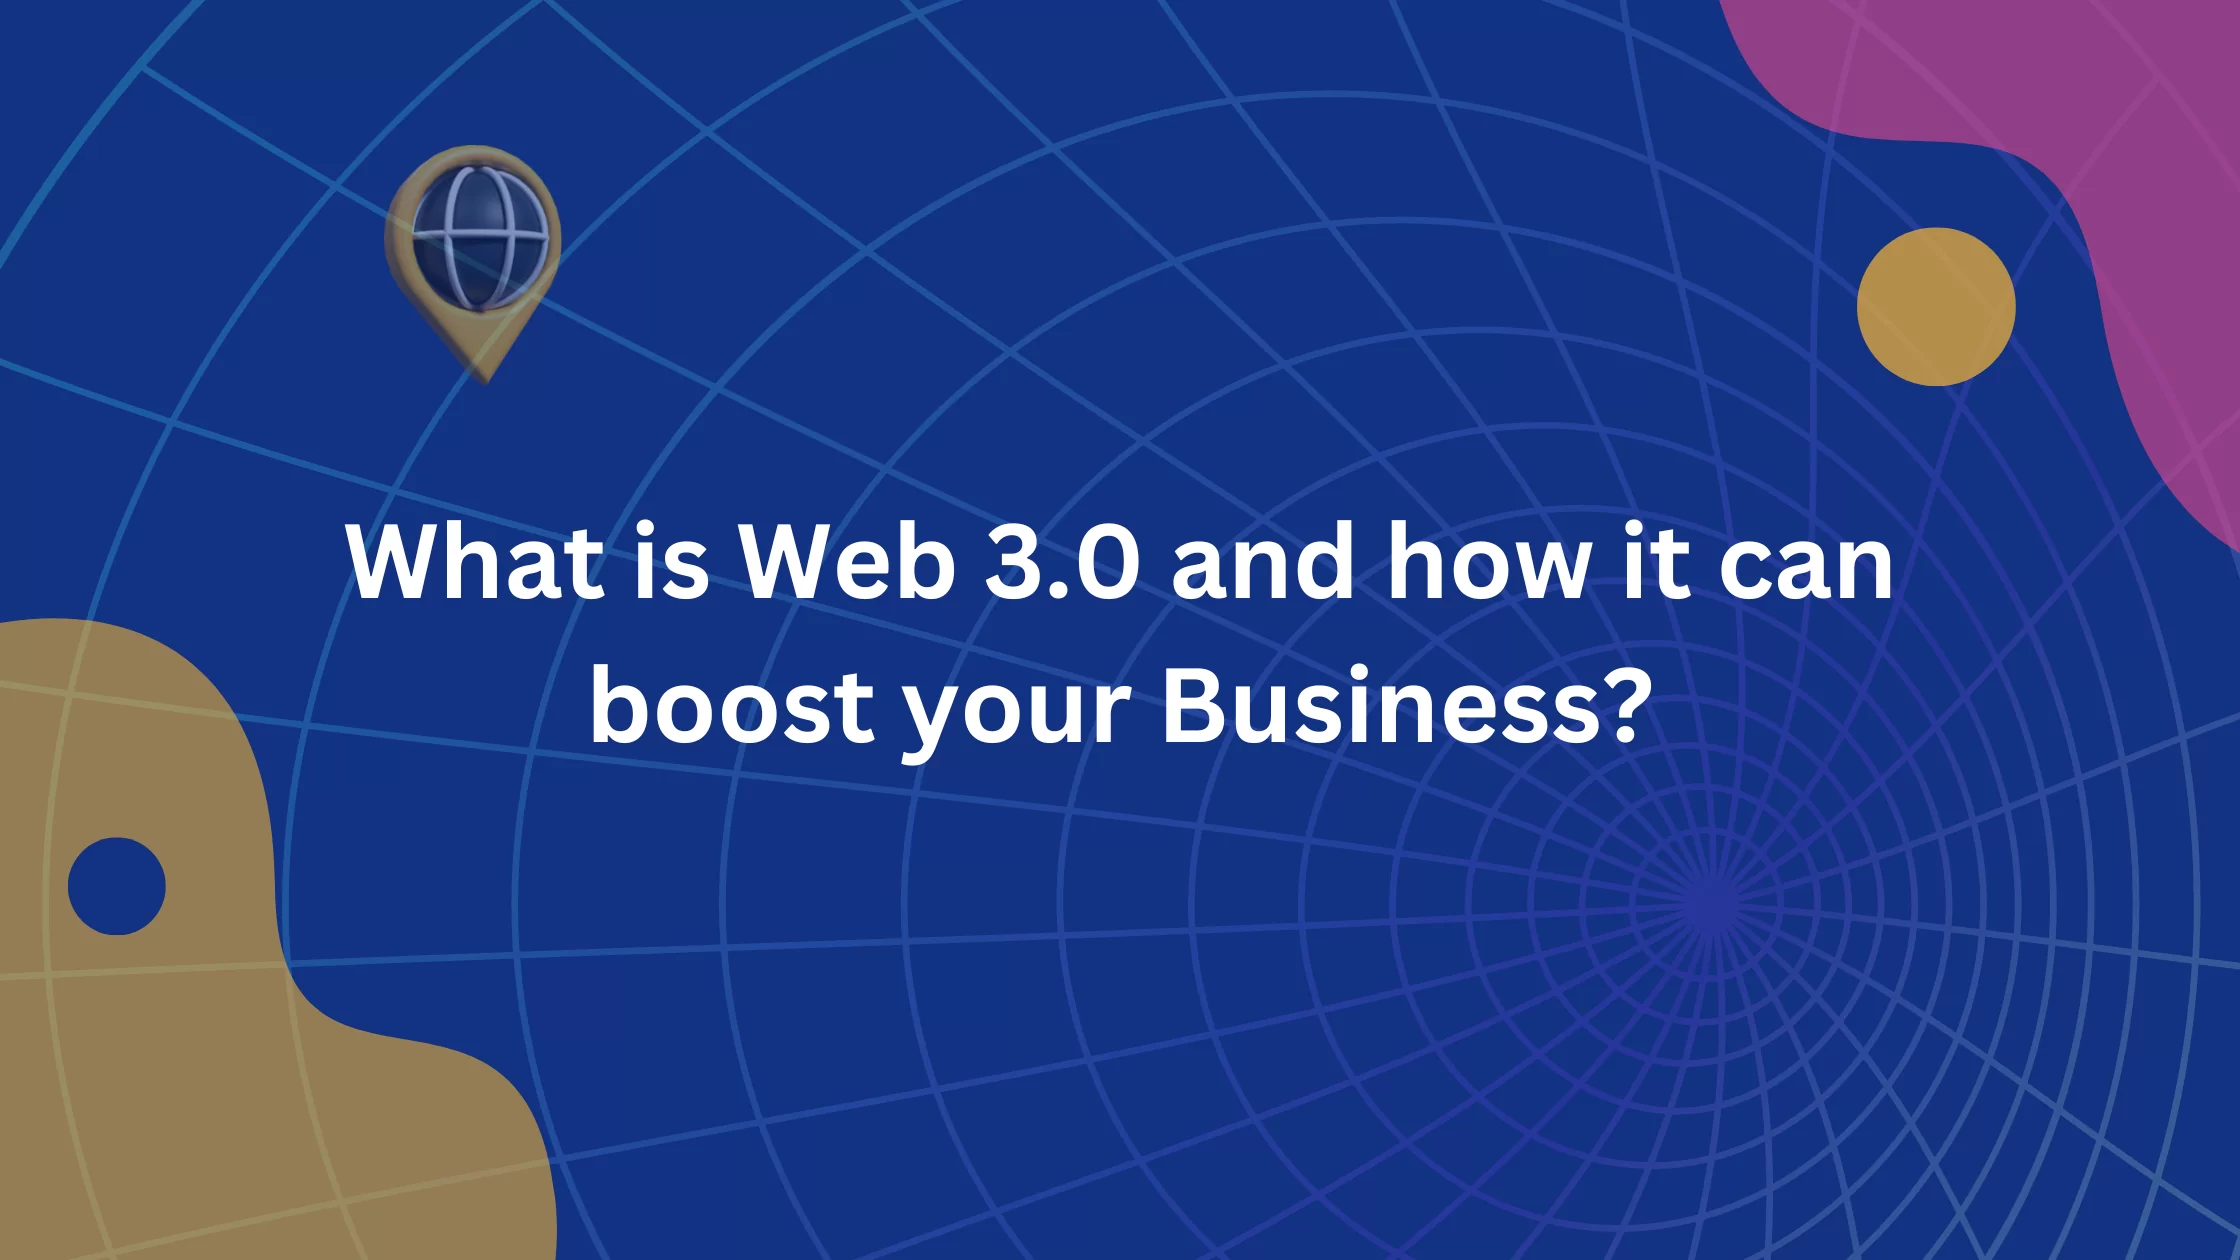 What is Web 3.0 and how it can boost your Business?